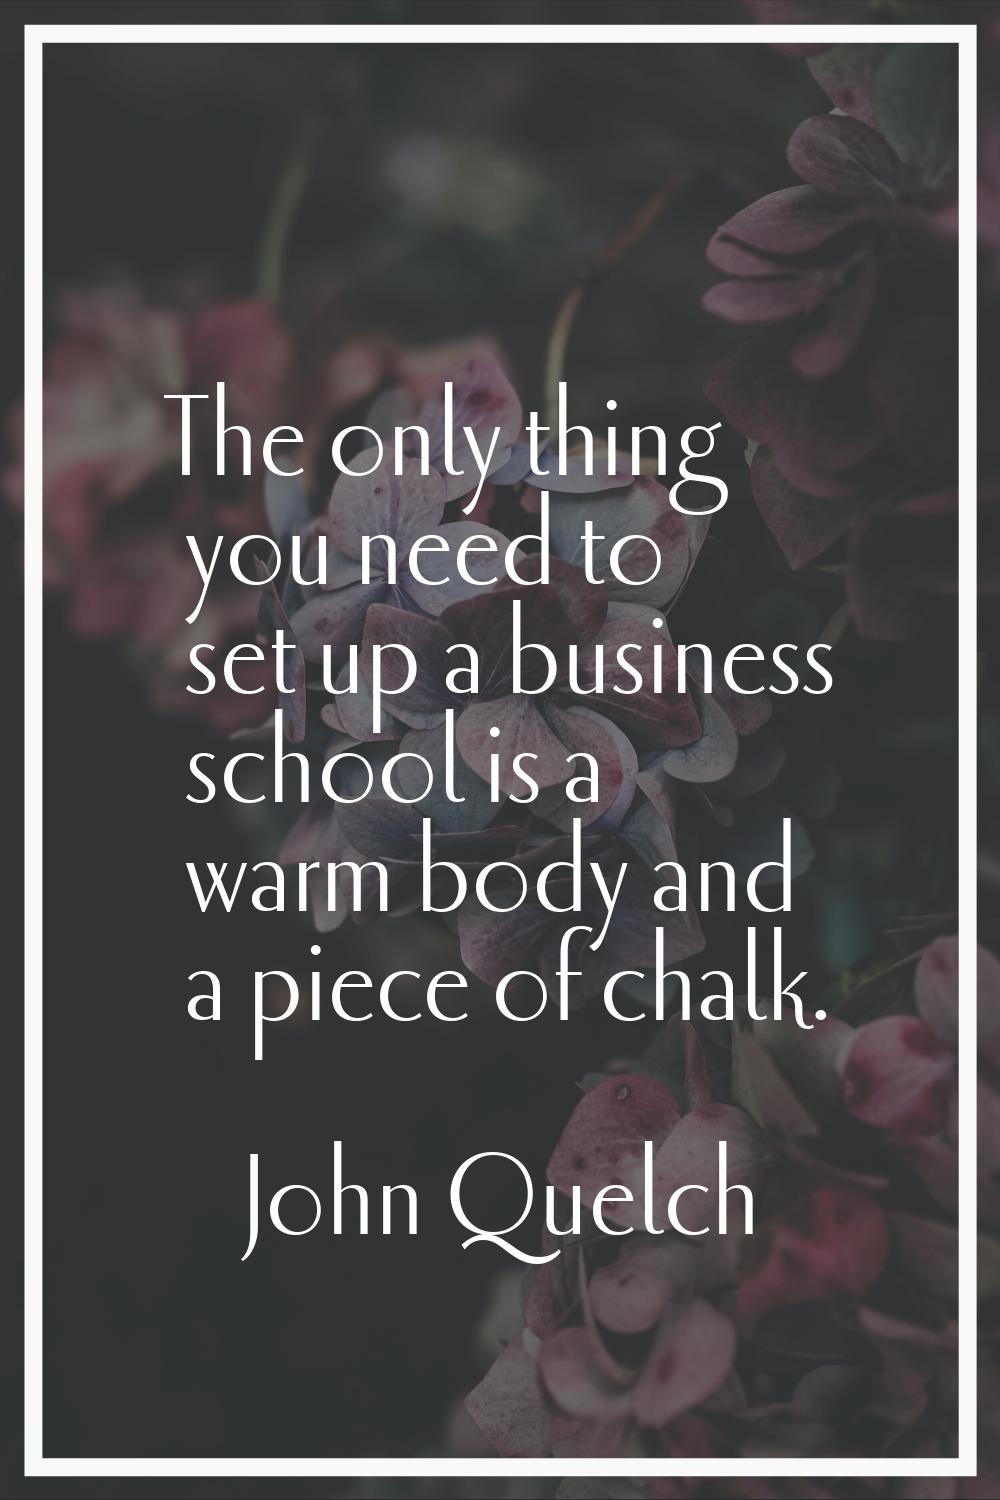 The only thing you need to set up a business school is a warm body and a piece of chalk.